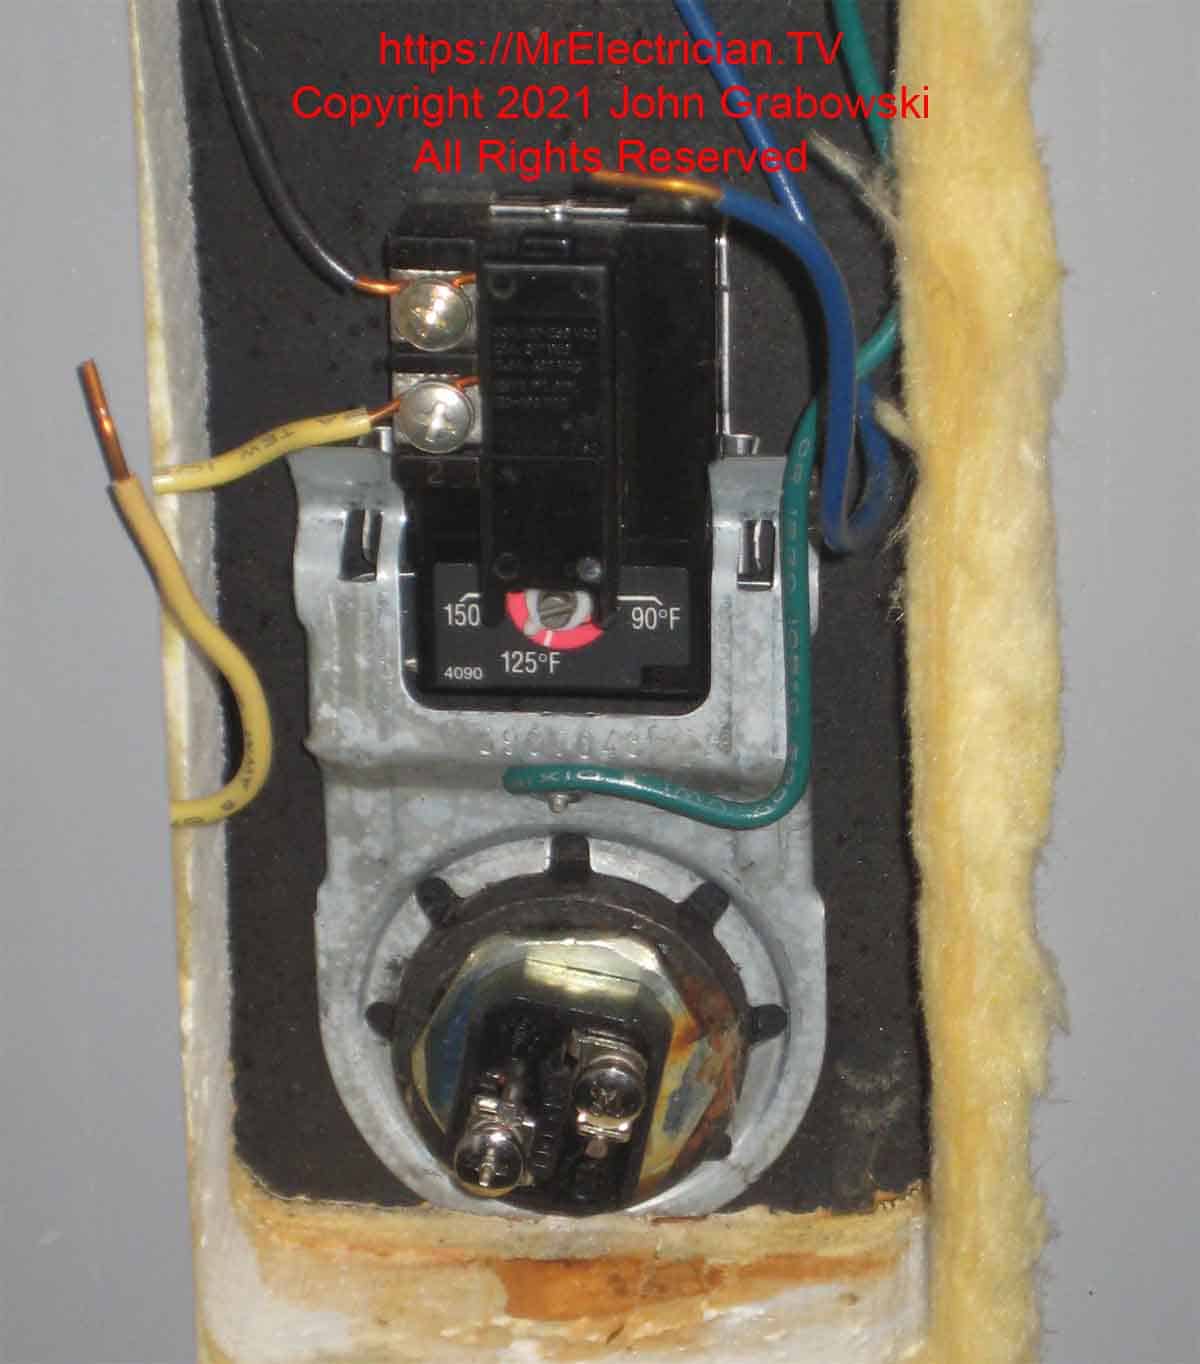 An electric water heater lower thermostat and heating element